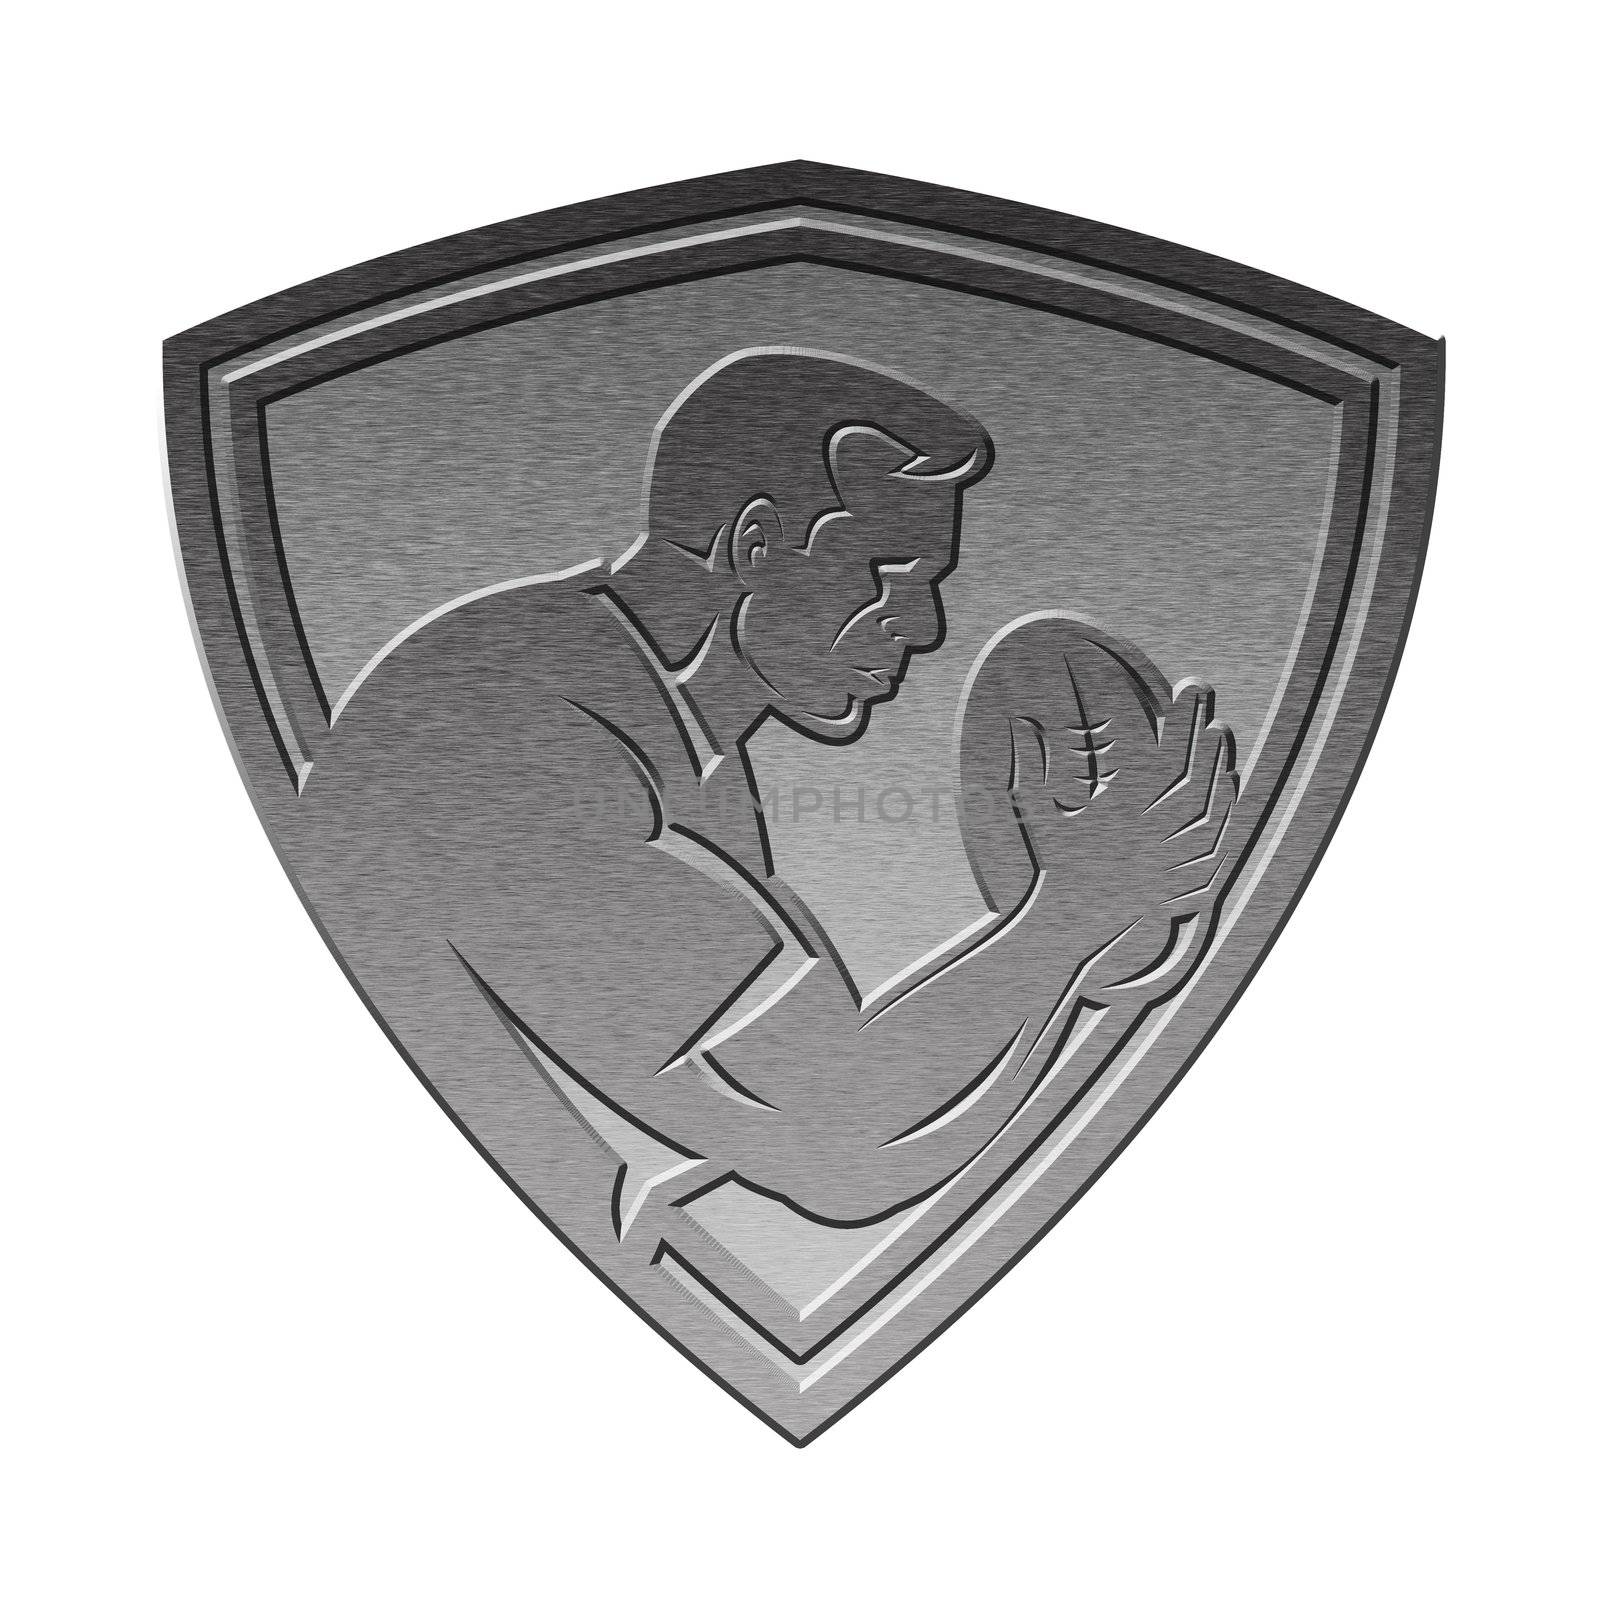 illustration of a rugby player running passing the ball on isolated background   done in metallic silver style set inside shield 